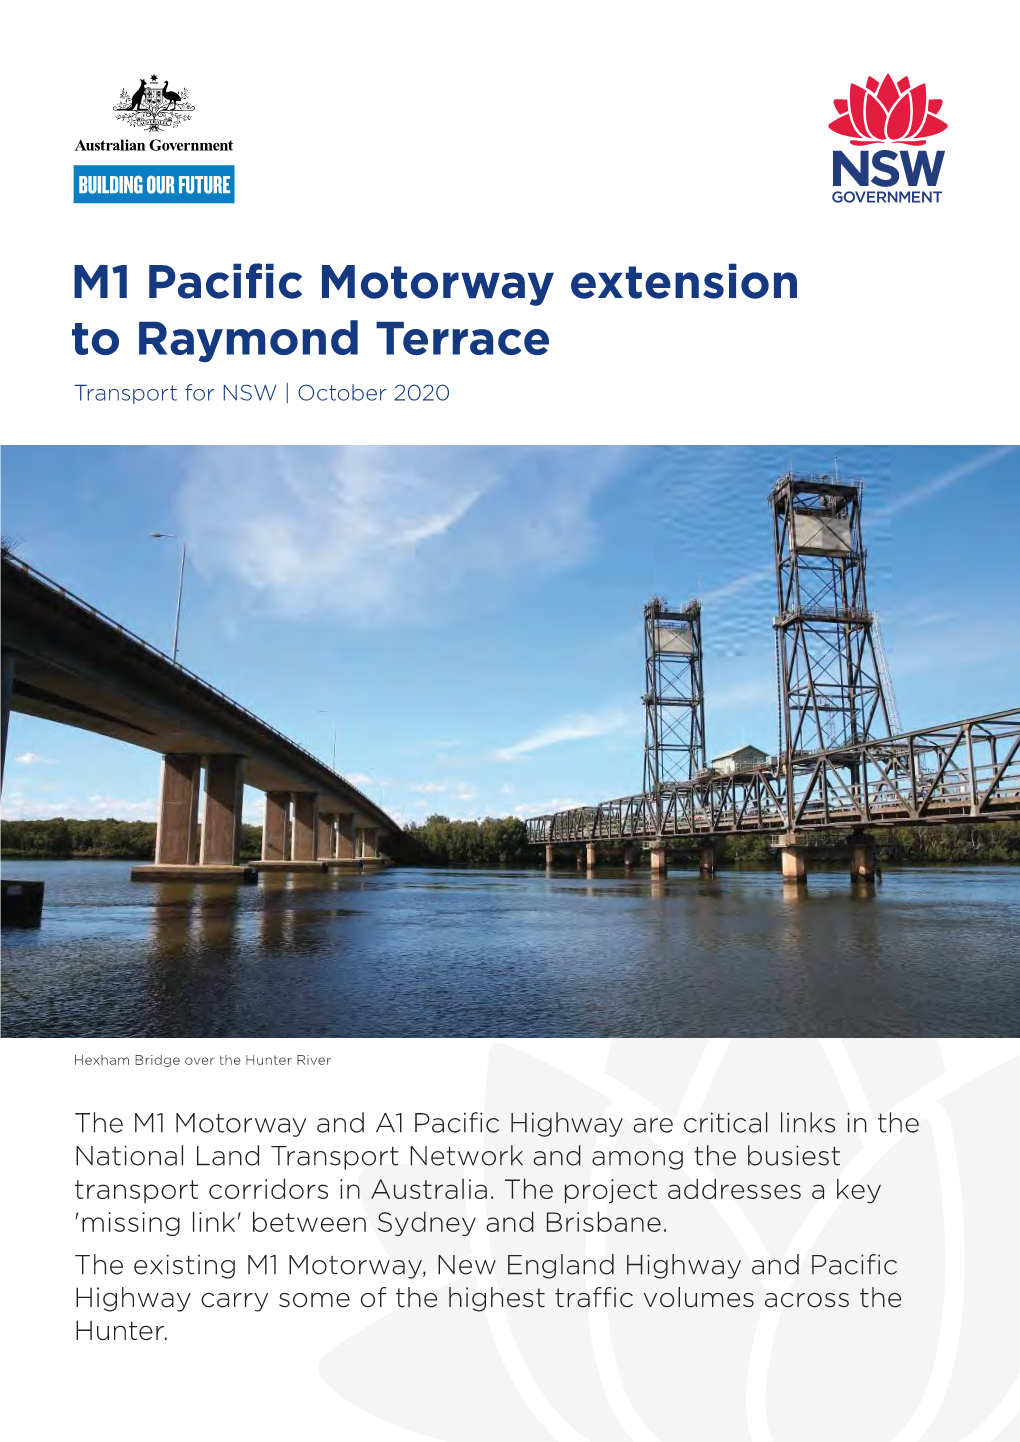 M1 Pacific Motorway Extension To